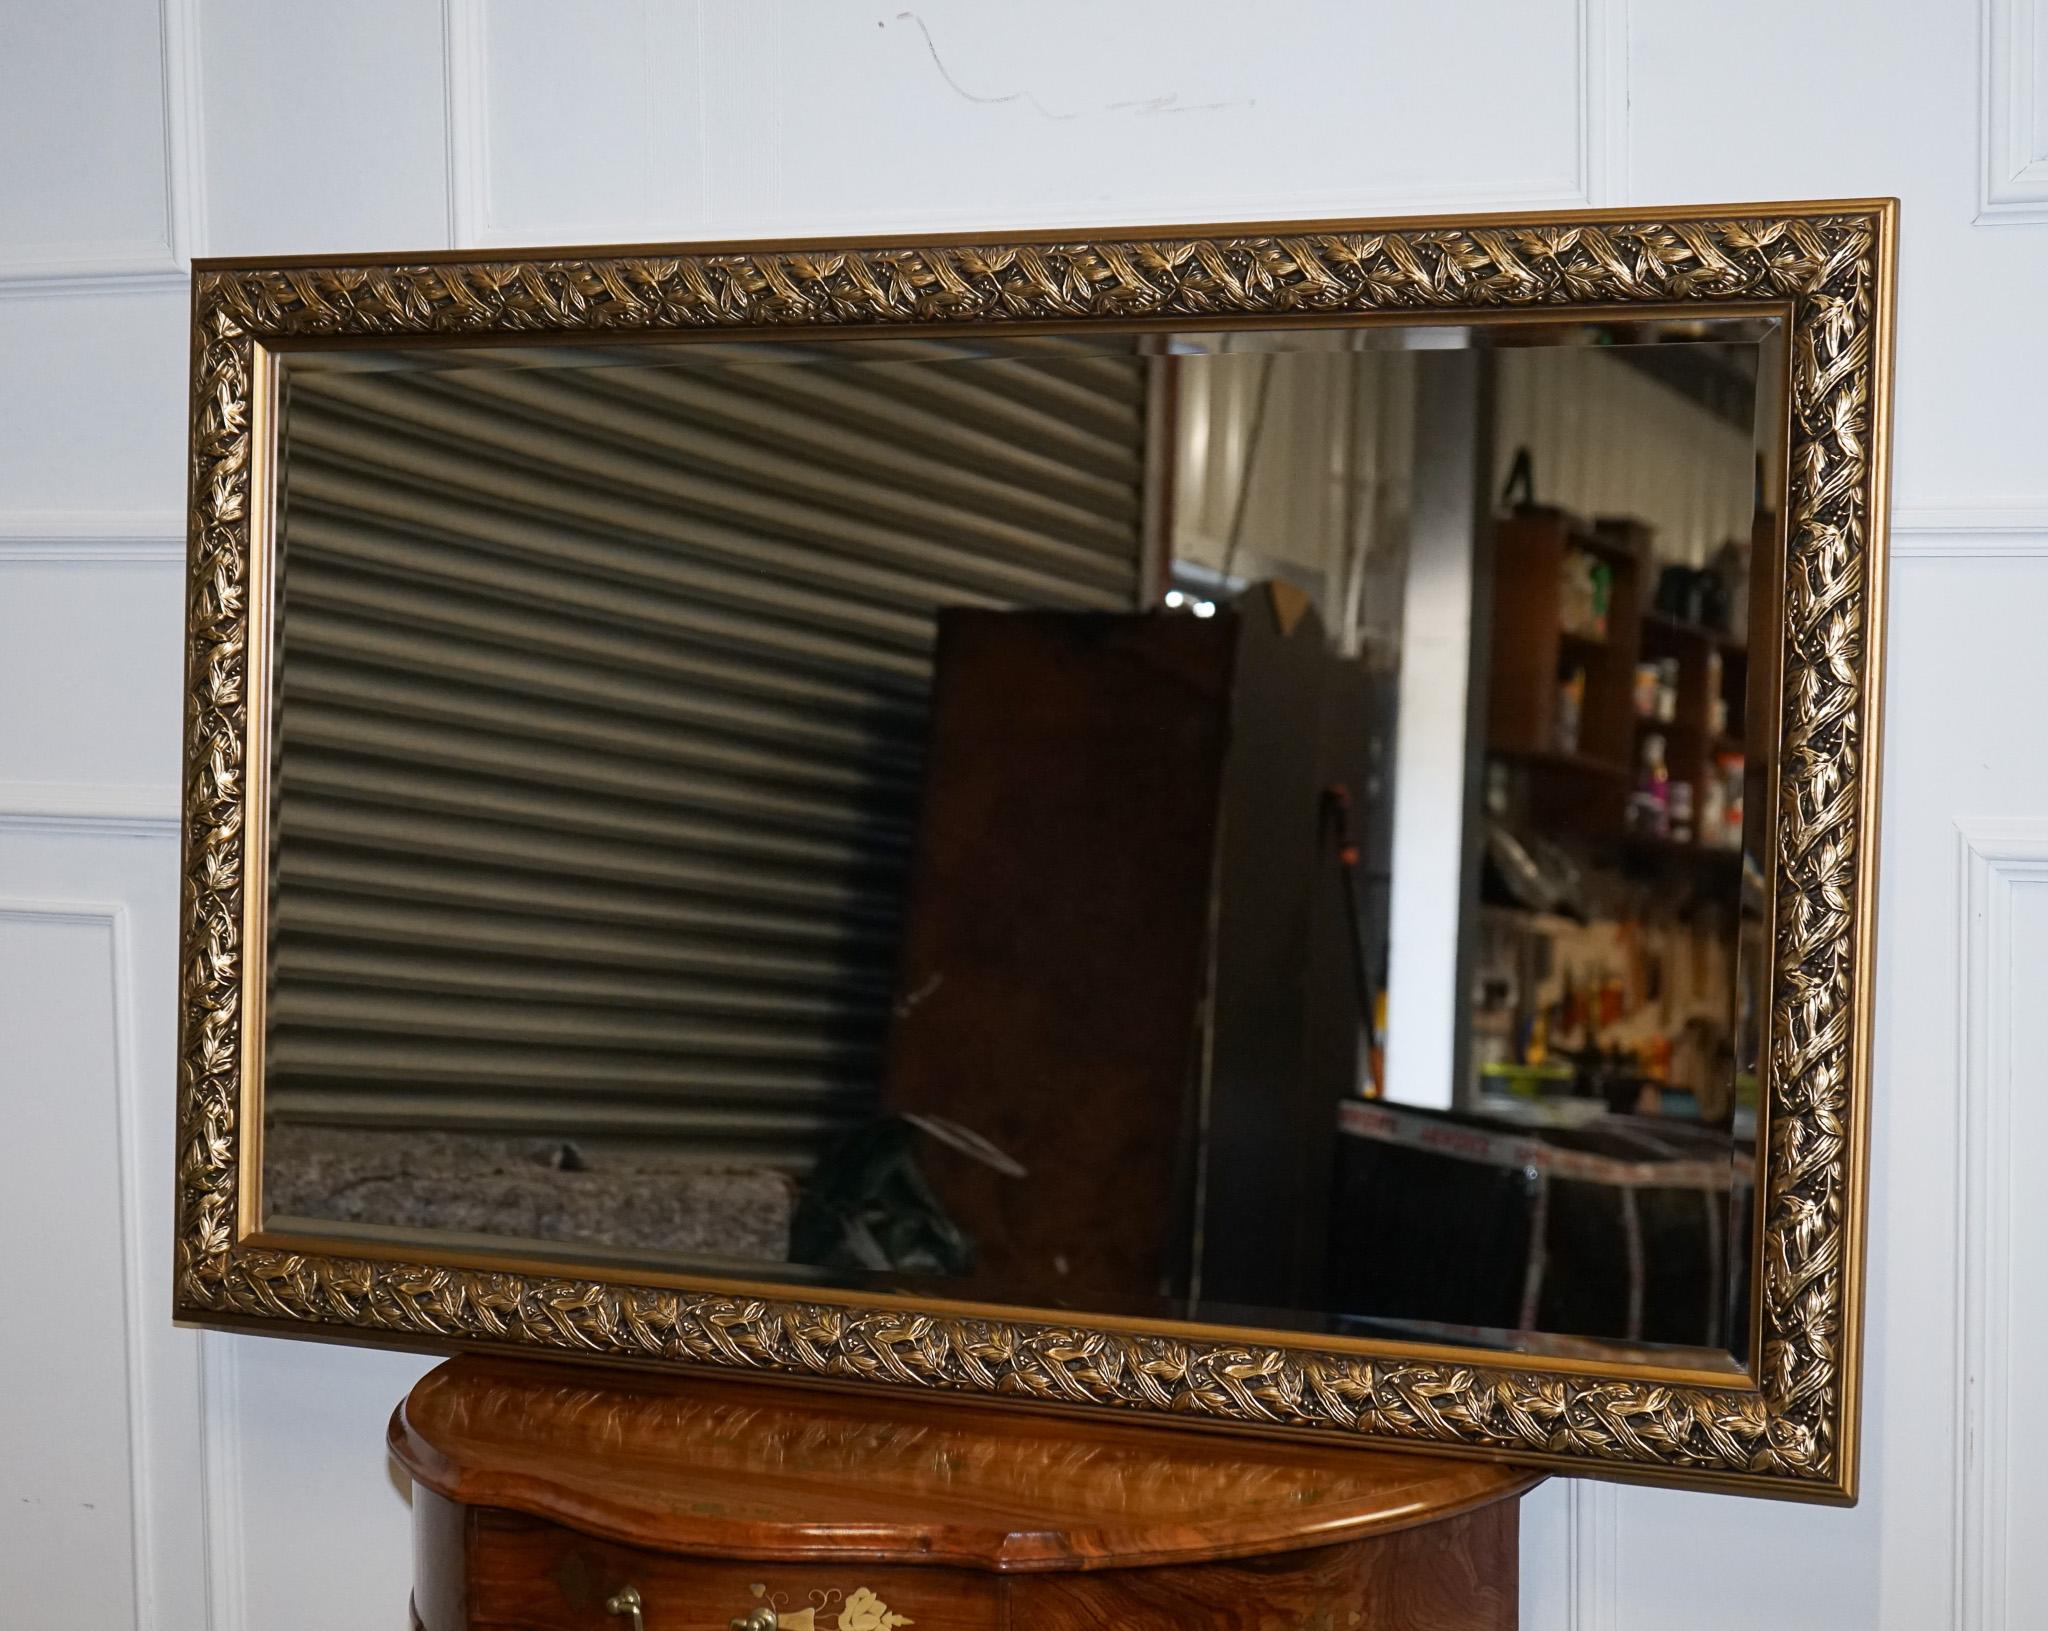 
We are delighted to offer for sale this Lovely Large Gold Ornate Bevelled Wall Mirror.

A Vintage Gold Ornate Bevelled Wall Mirror is a beautifully crafted and elegant piece of decor that adds a touch of vintage glamour to any room. This particular